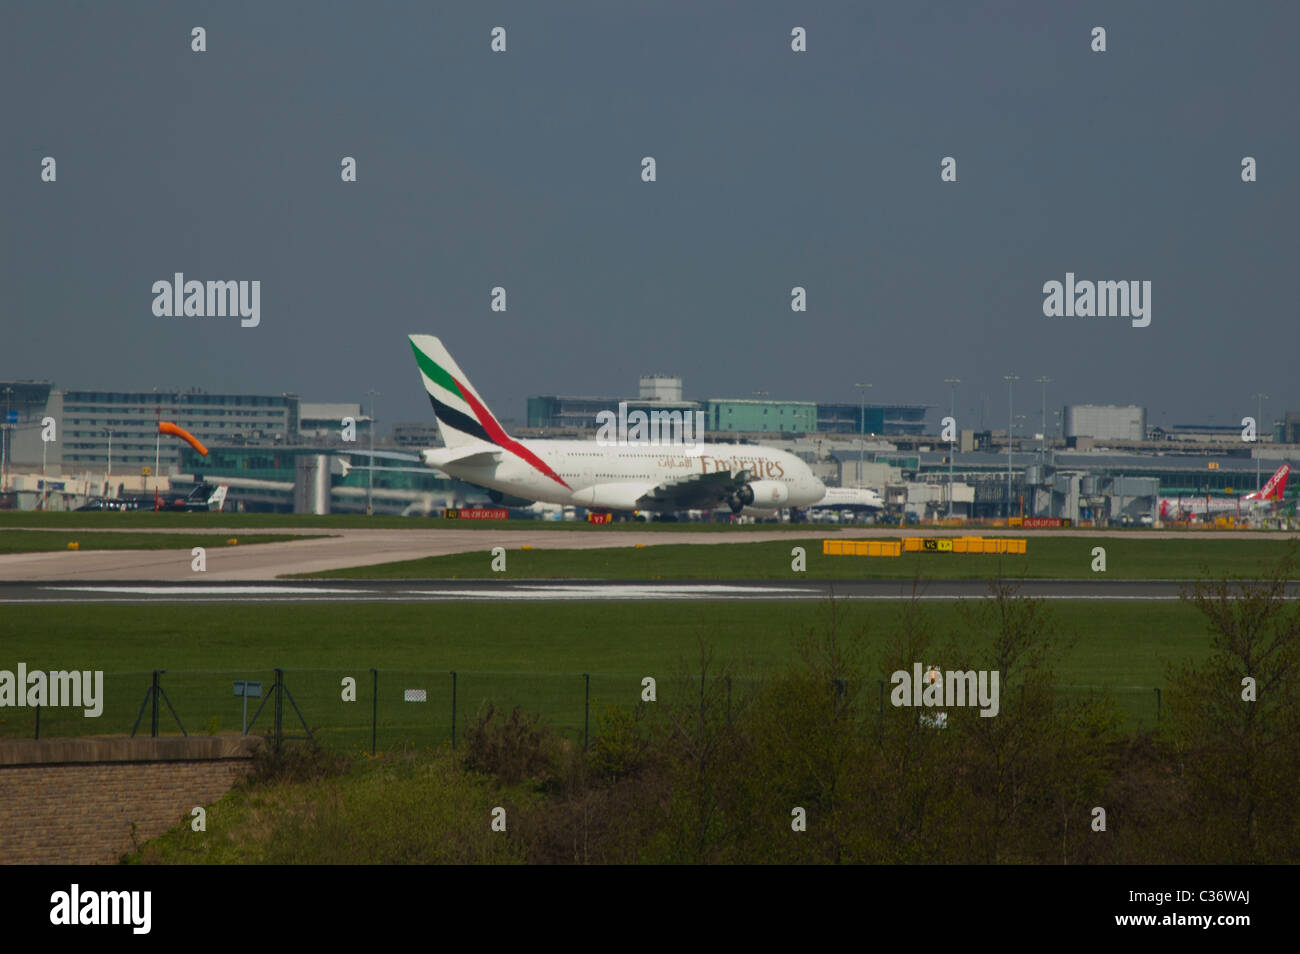 Airbus A380 on the apron at Manchester Airport as passengers disembark. Its size can easily be seen against the terminal behind Stock Photo